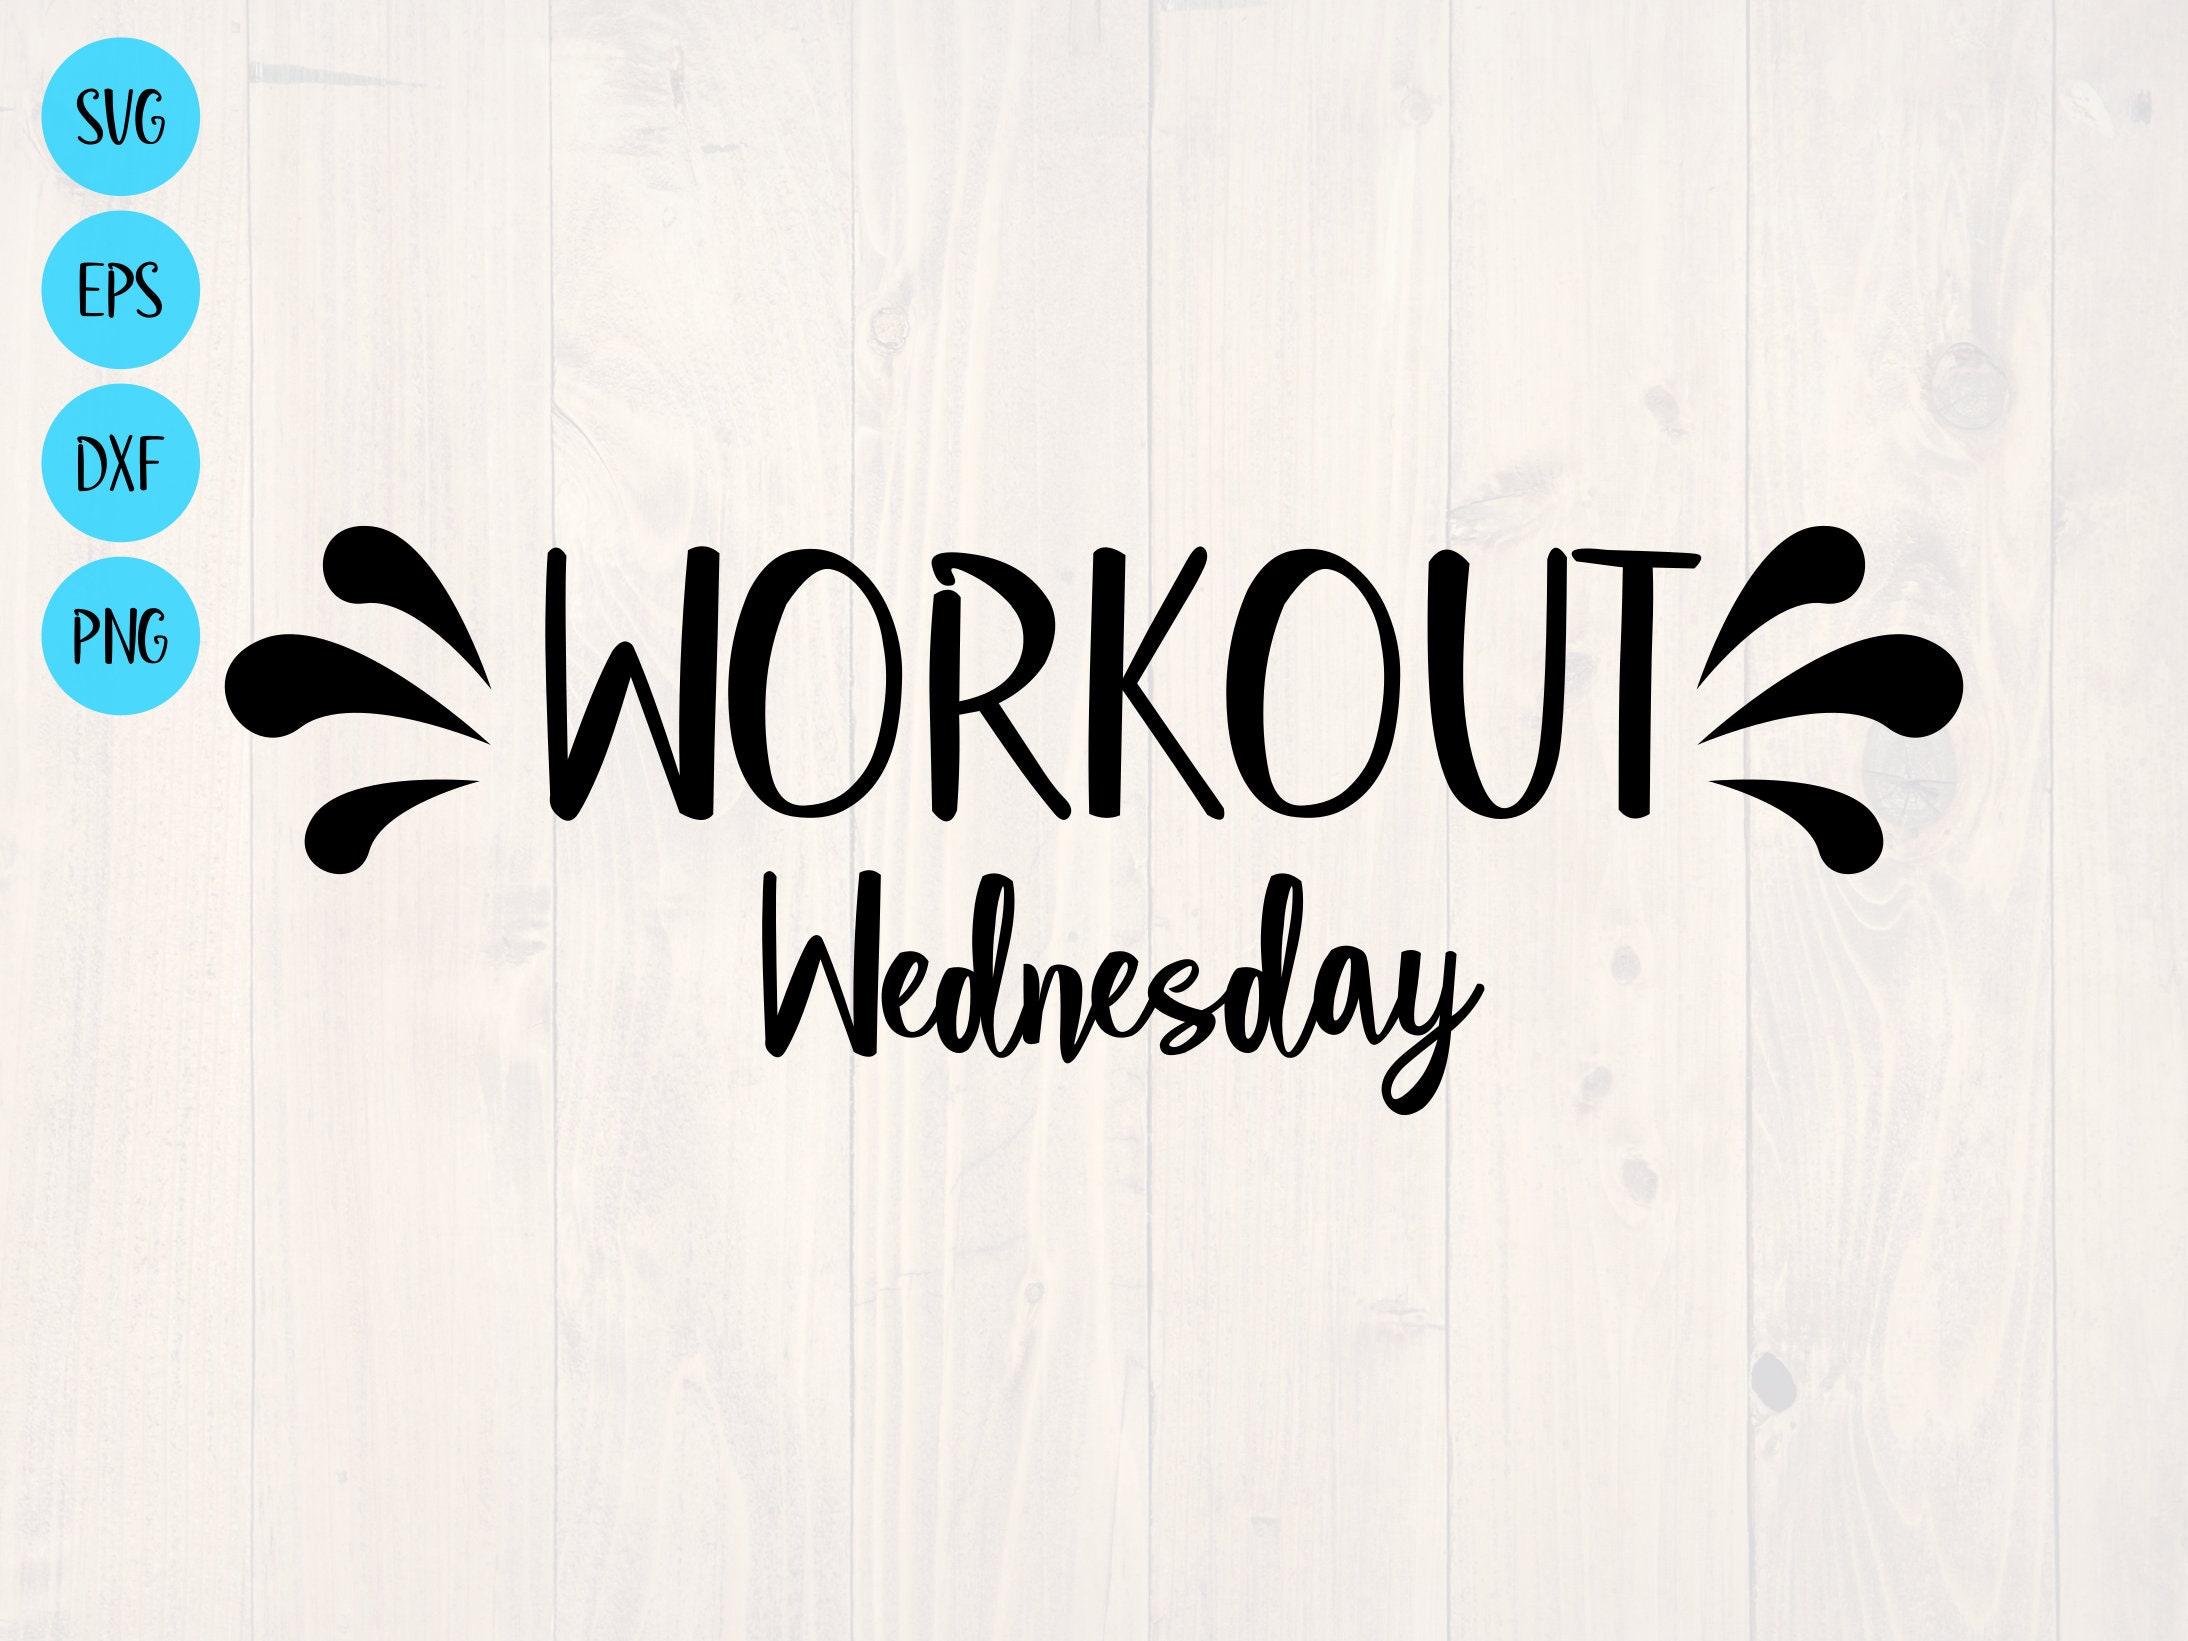 Workout Wednesday SVG is a funny exercise and gym shirt design